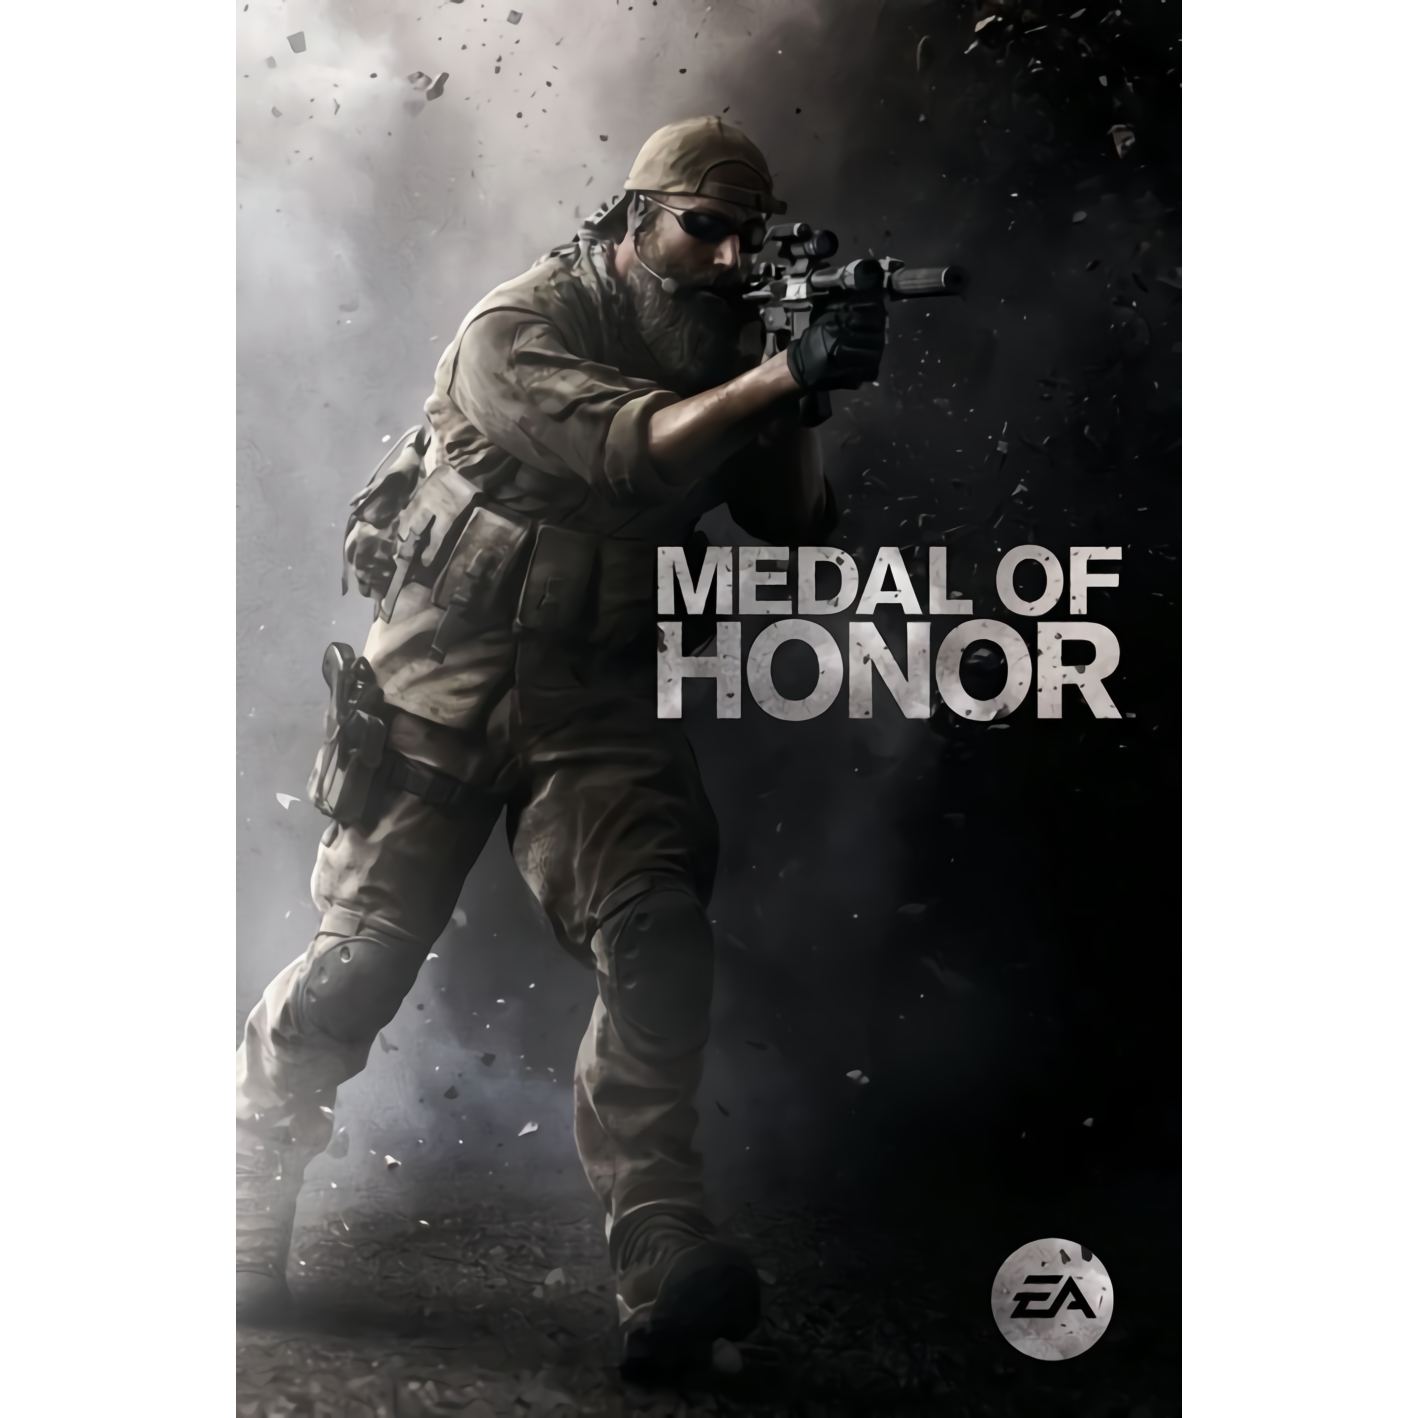 Medal of Honor. Medal of Honor 2010 обложка. Medal of Honor poster. Medal of Honor (игра, 2010). Medal of honor отзывы